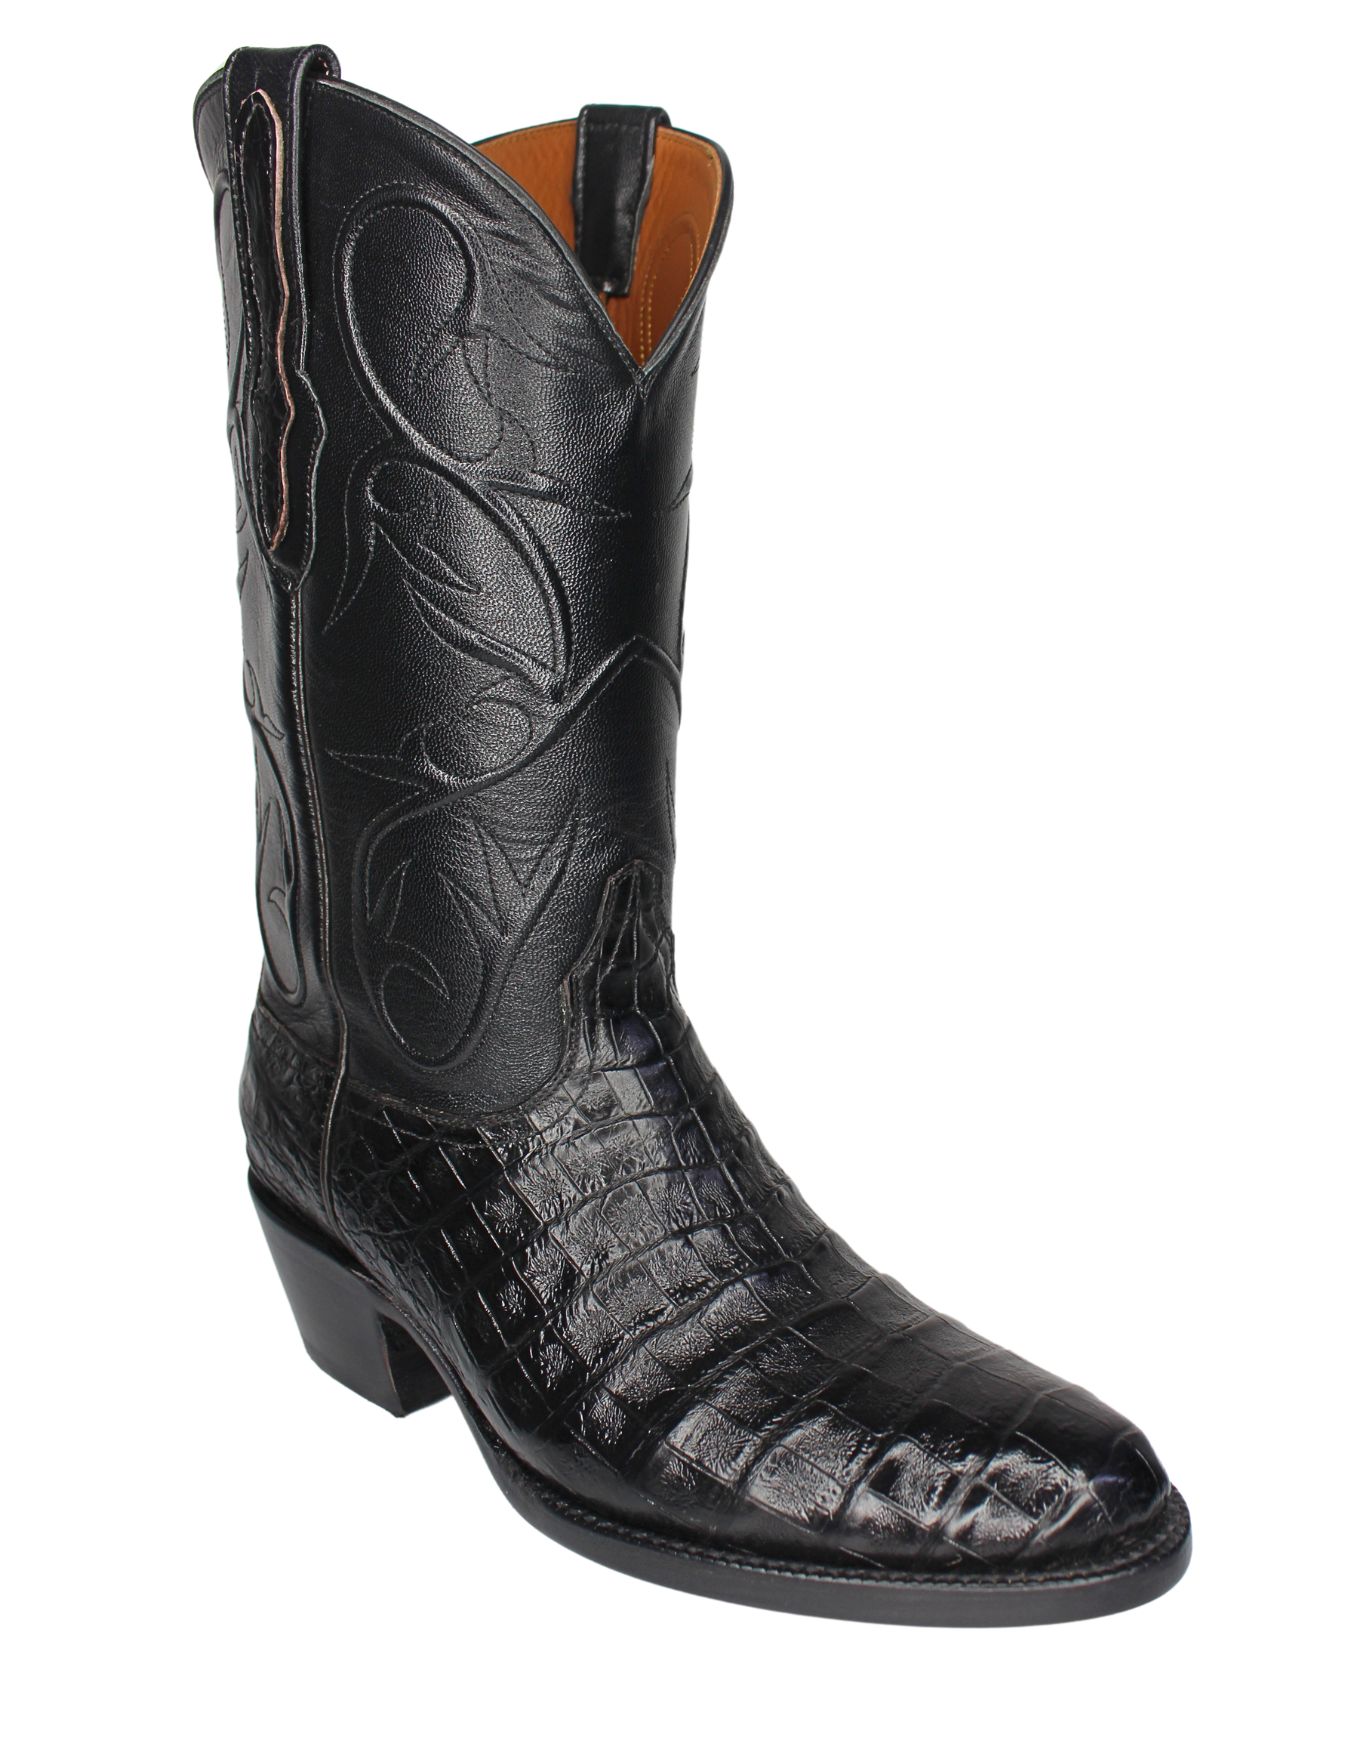 Boots or Shoes - Texas Boot Company